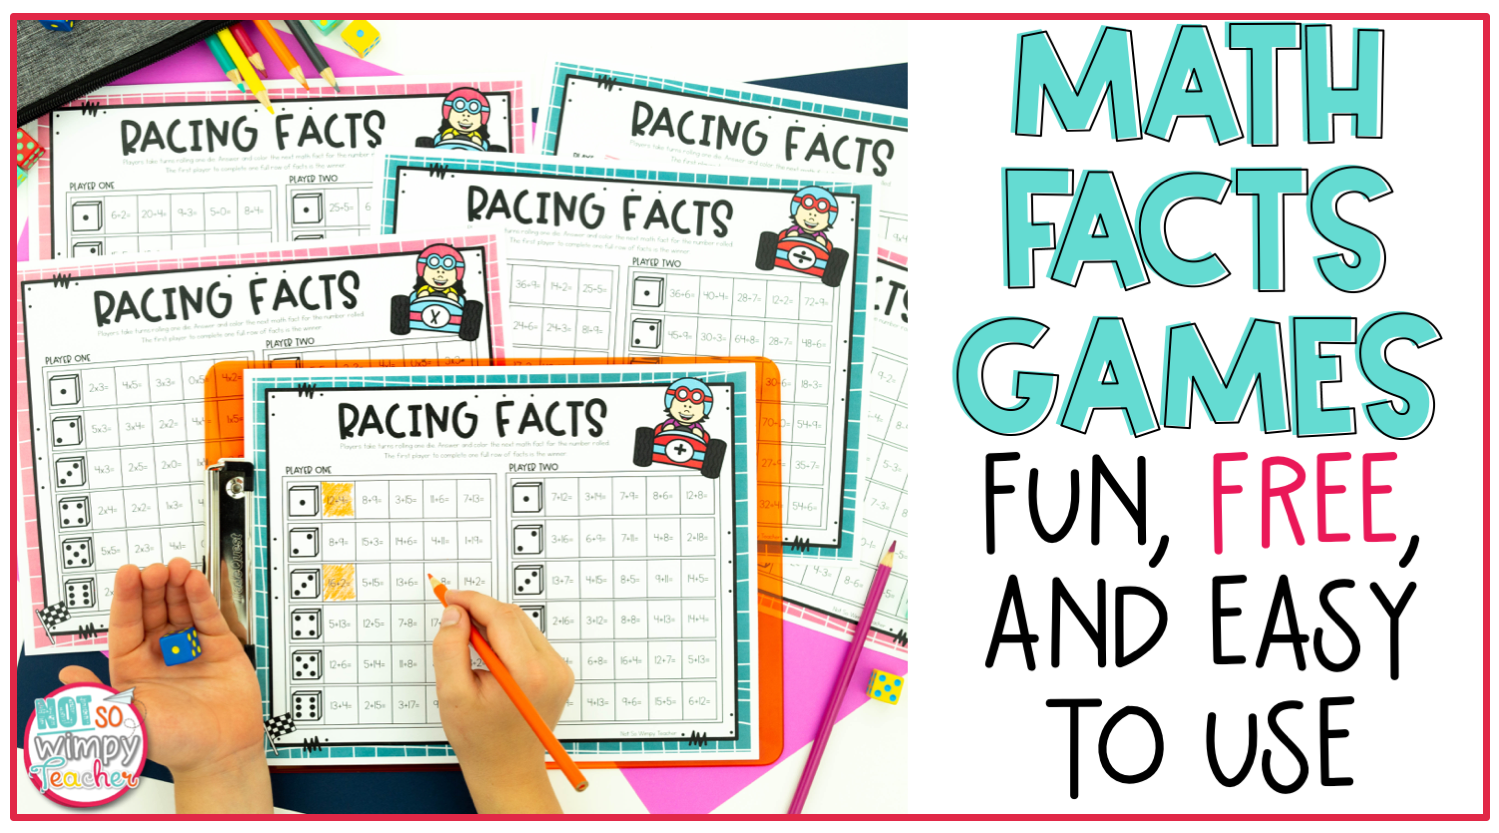 math-fact-games-fun-free-easy-to-use-not-so-wimpy-teacher